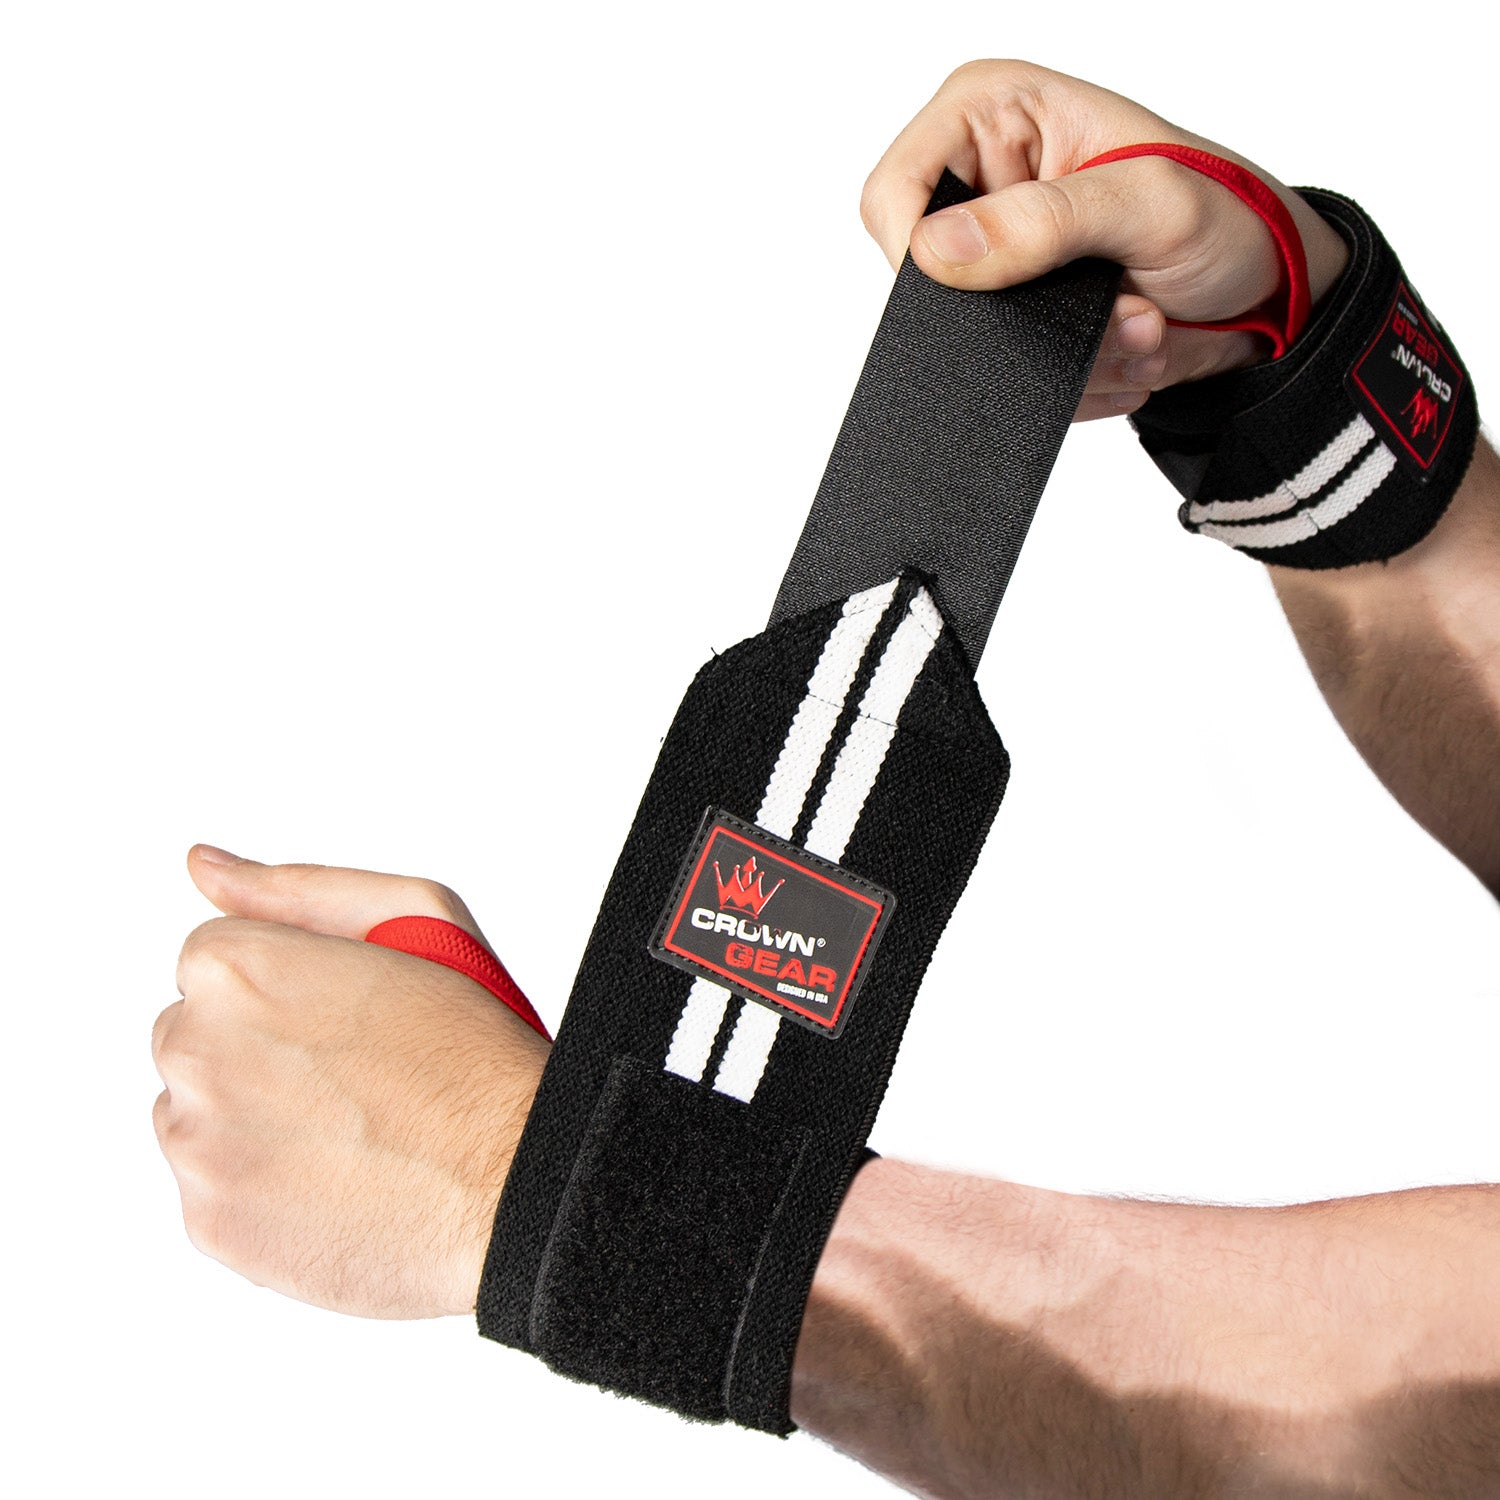 Wrist Straps for Weight Lifting - Lifting Straps for Weightlifting